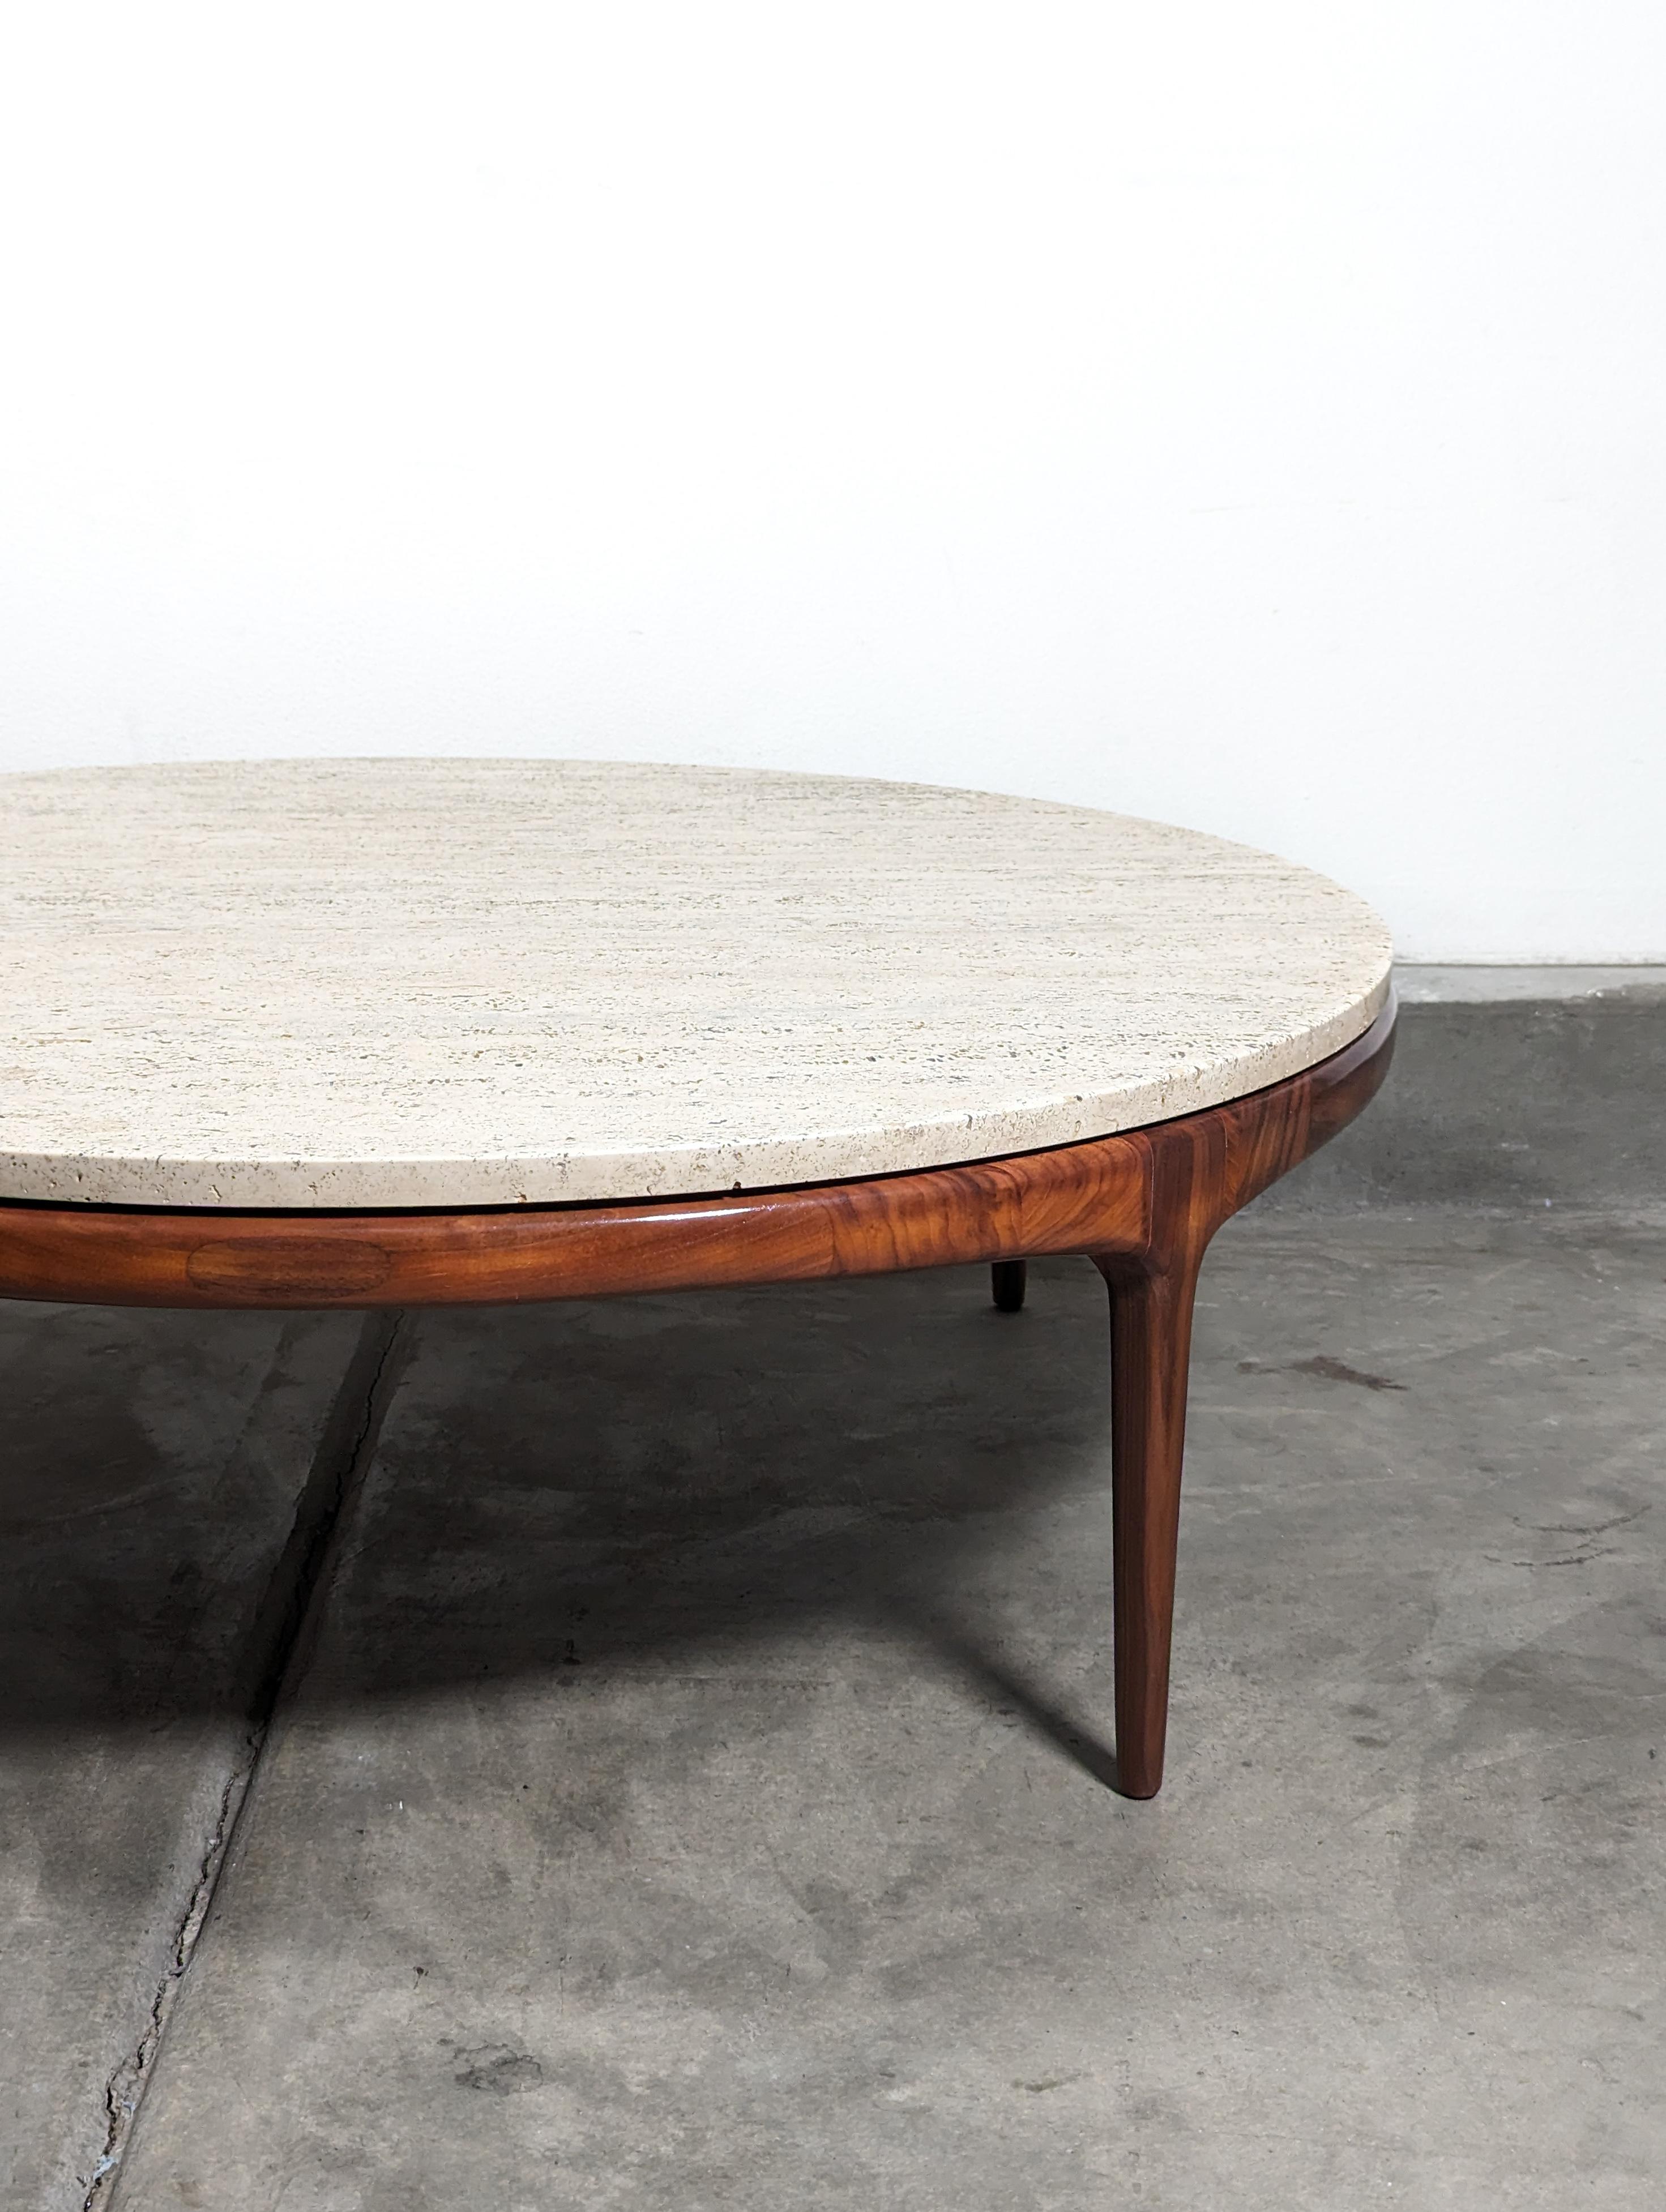 Mid Century Modern Walnut Rythm Coffee Table with Travertine Top by Lane, c1960s For Sale 4